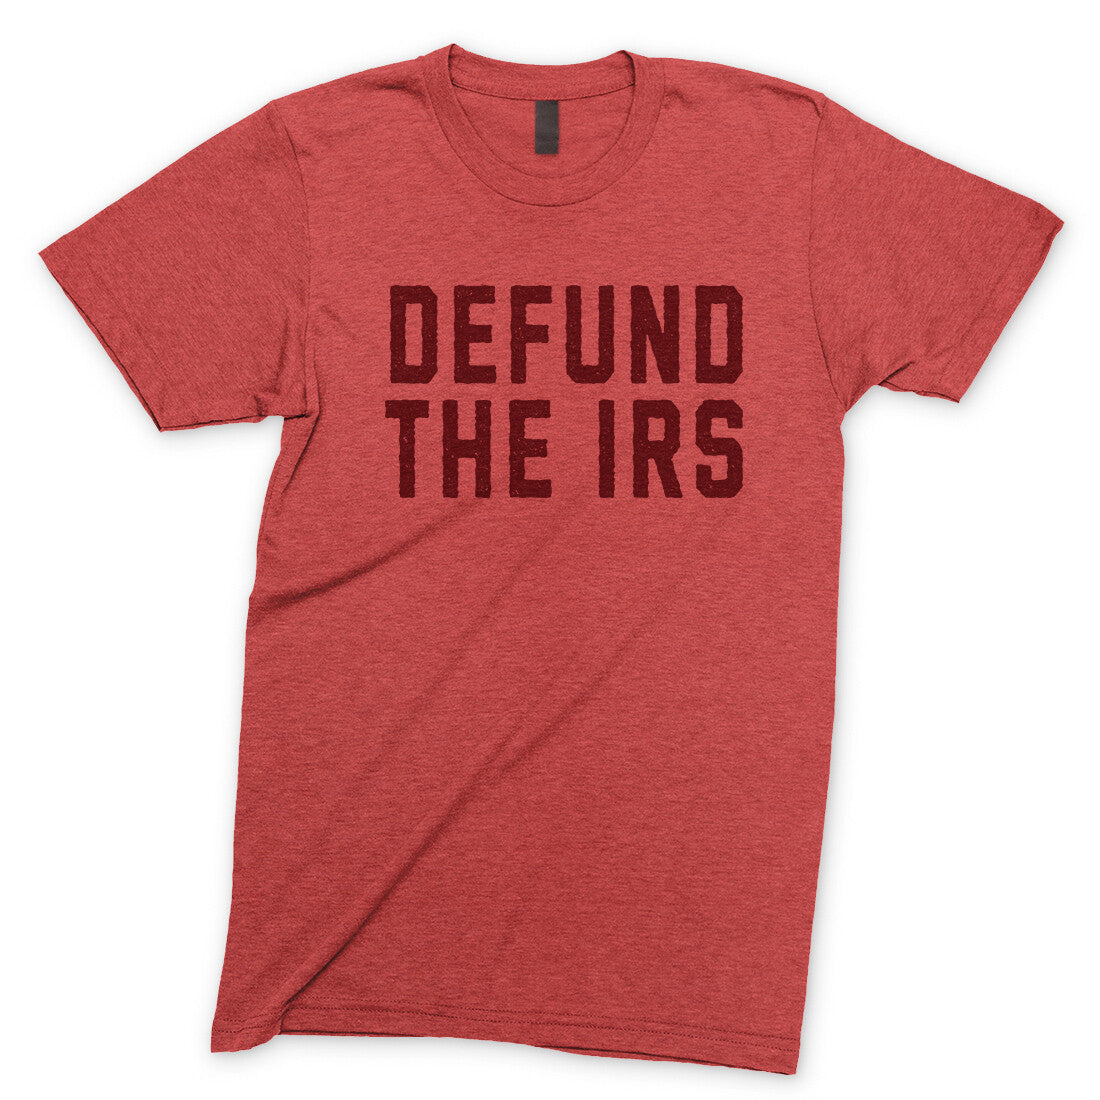 Defund the IRS in Heather Red Color